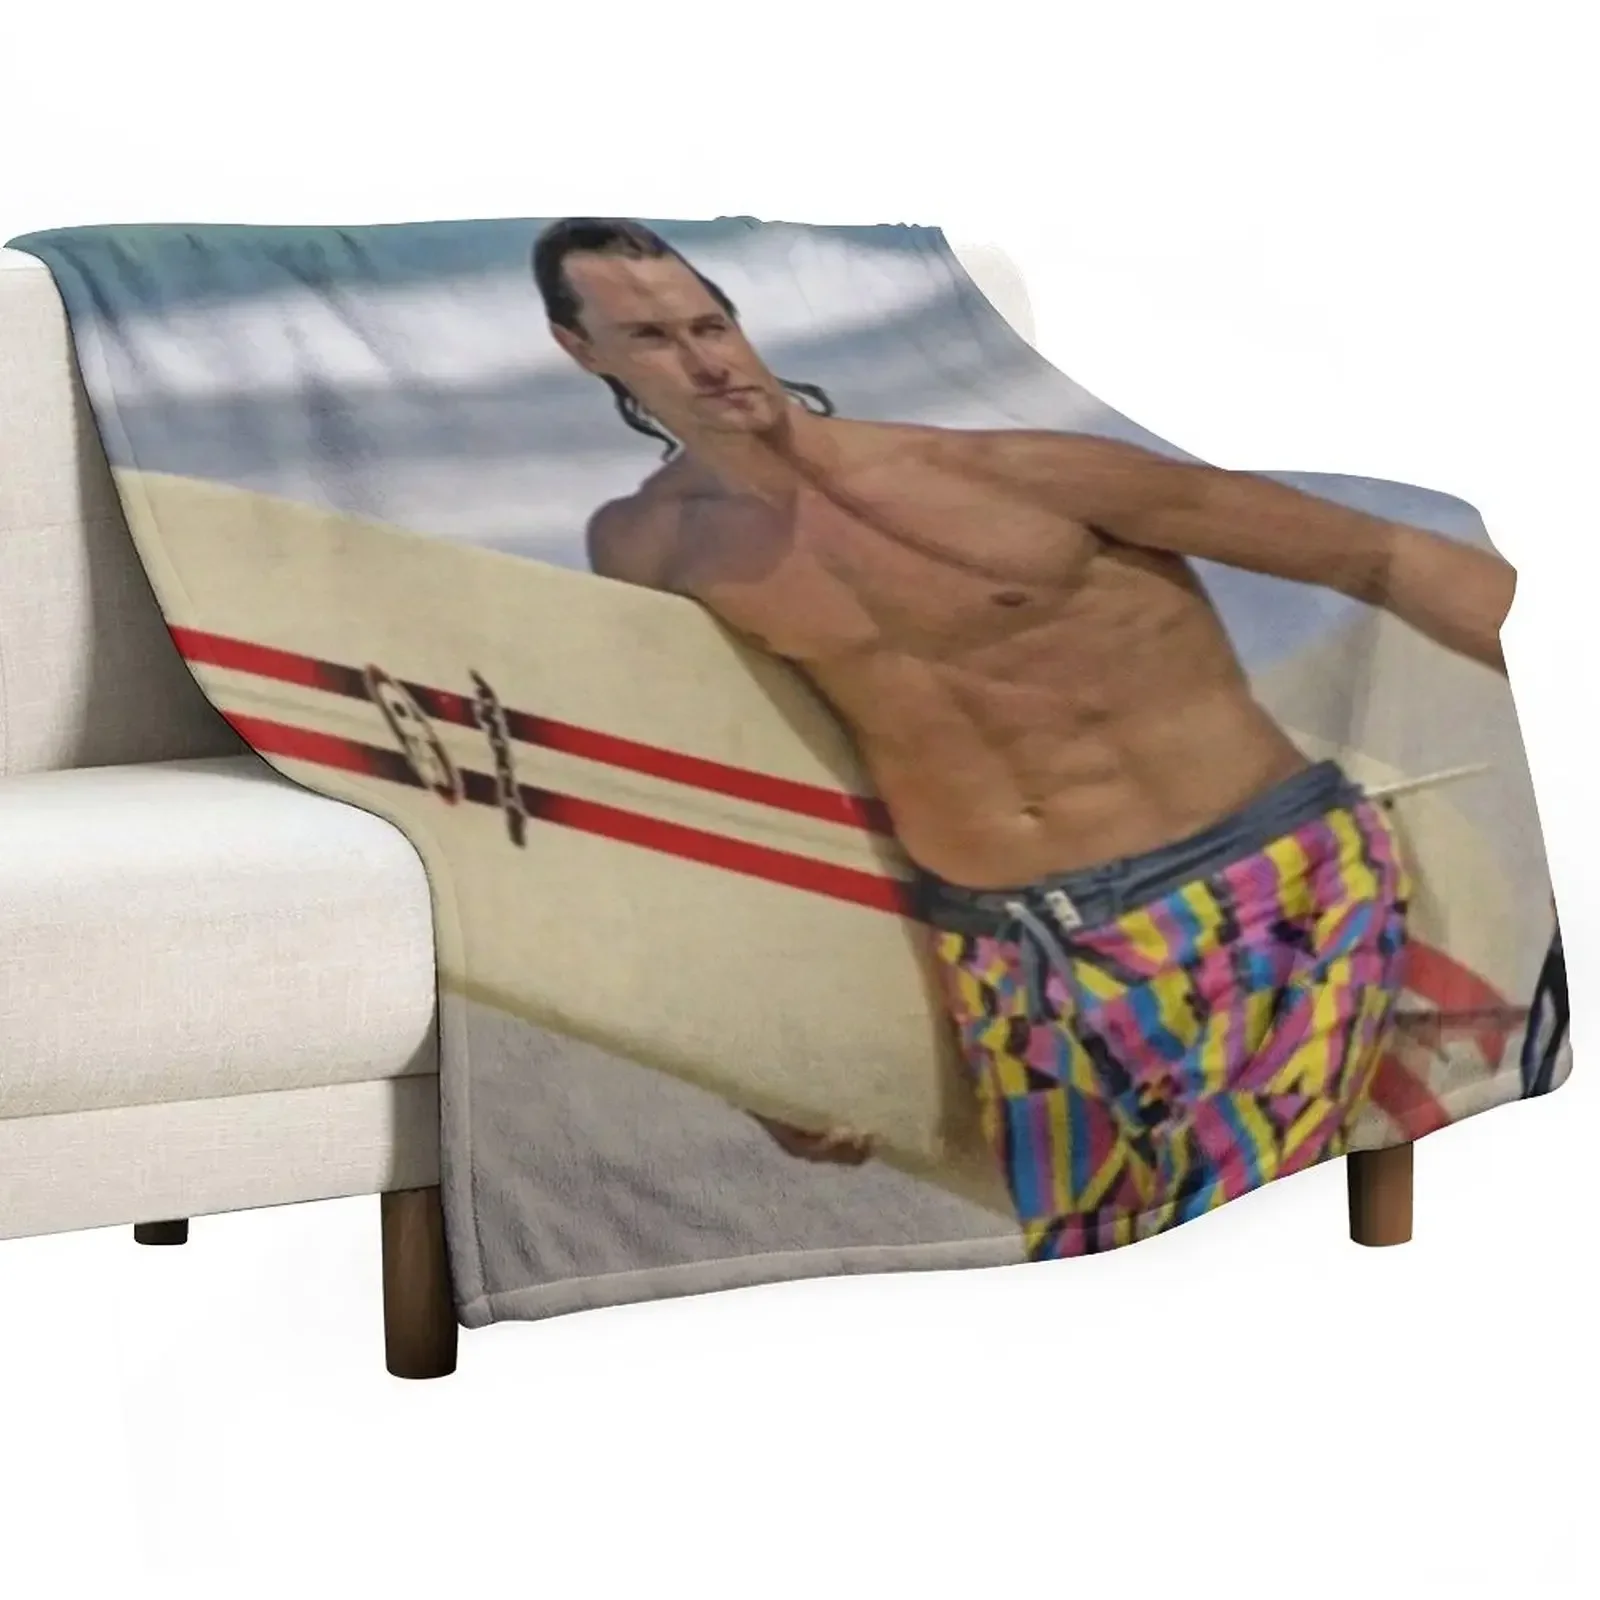 

young MatthewMcConaughey Throw Blanket Extra Large Throw valentine gift ideas Stuffeds Large Blankets